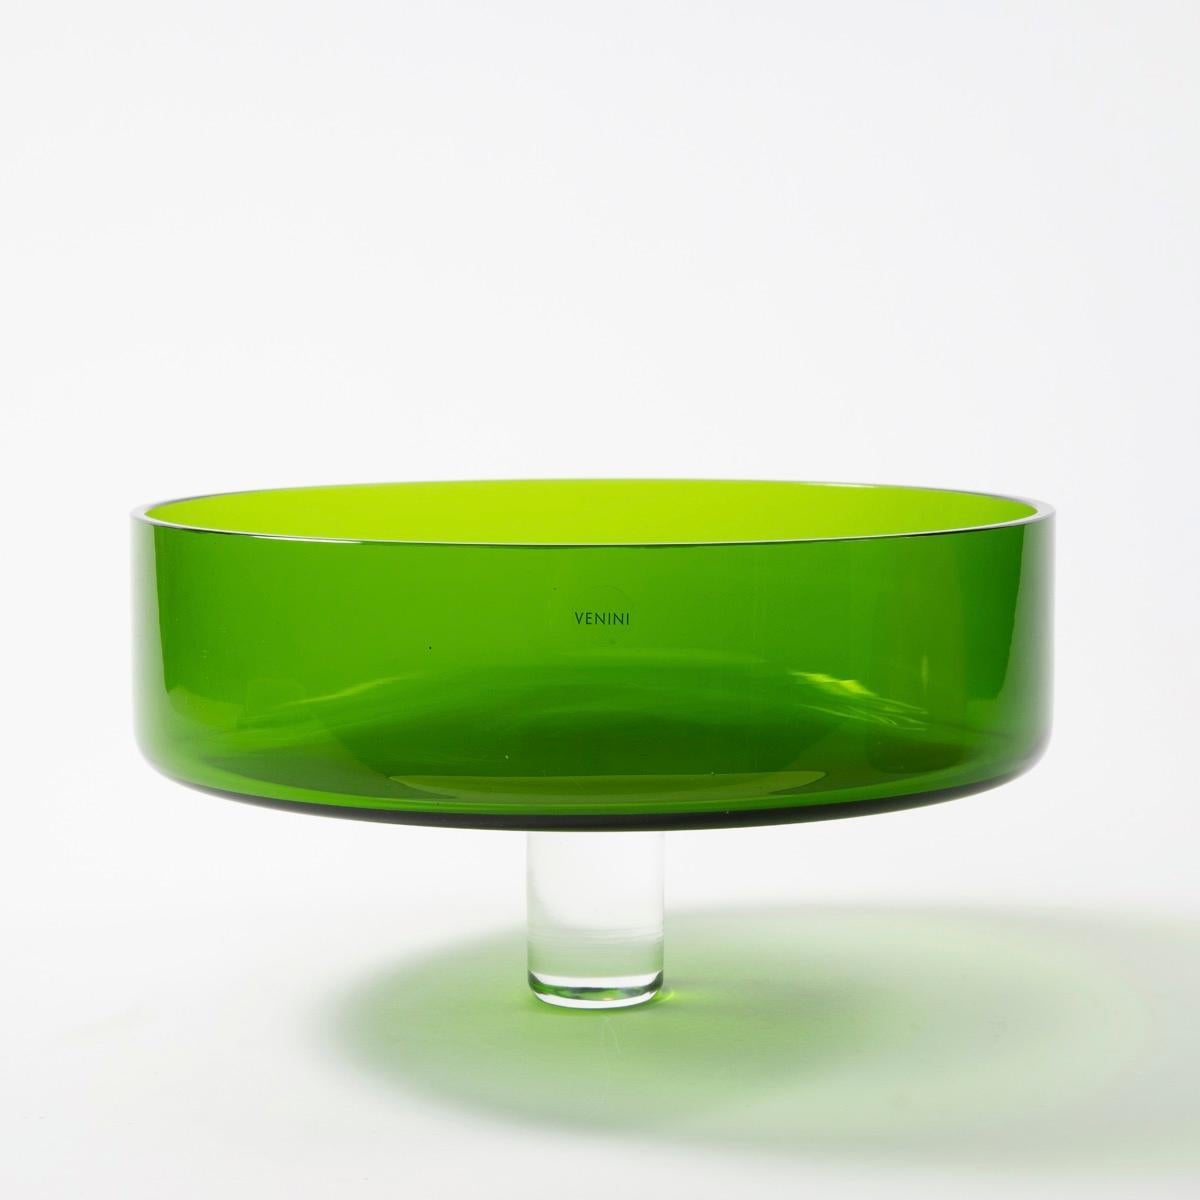 Puzzle is a piece arising from a series of vases and centerpieces imagined by Ettore Sottsass for Venini at the end of the 2000s. 
The base is made of glass and has a coral colour. The upper part is a bright green glass tray, on which a shaft was